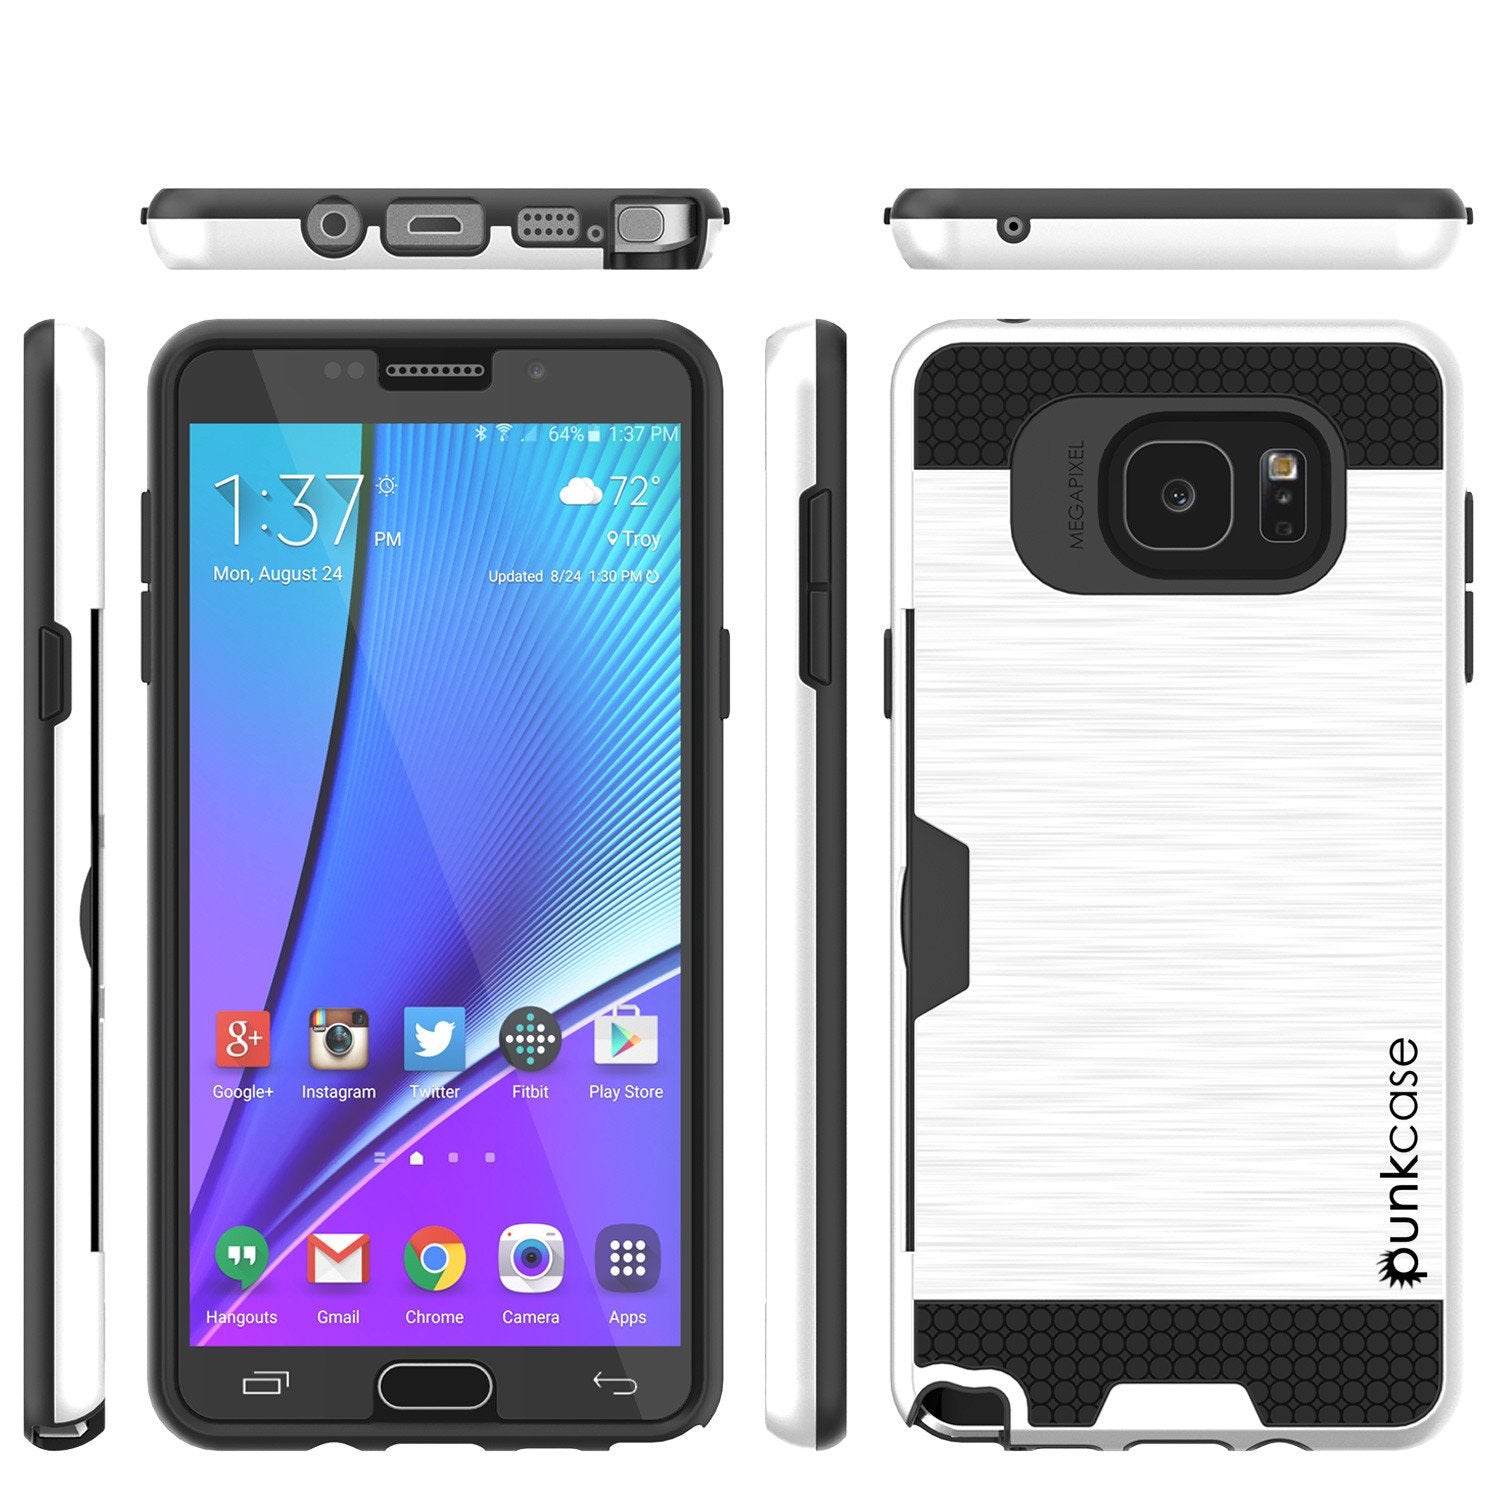 Galaxy Note 5 Case PunkCase SLOT White Series Slim Armor Soft Cover Case w/ Tempered Glass